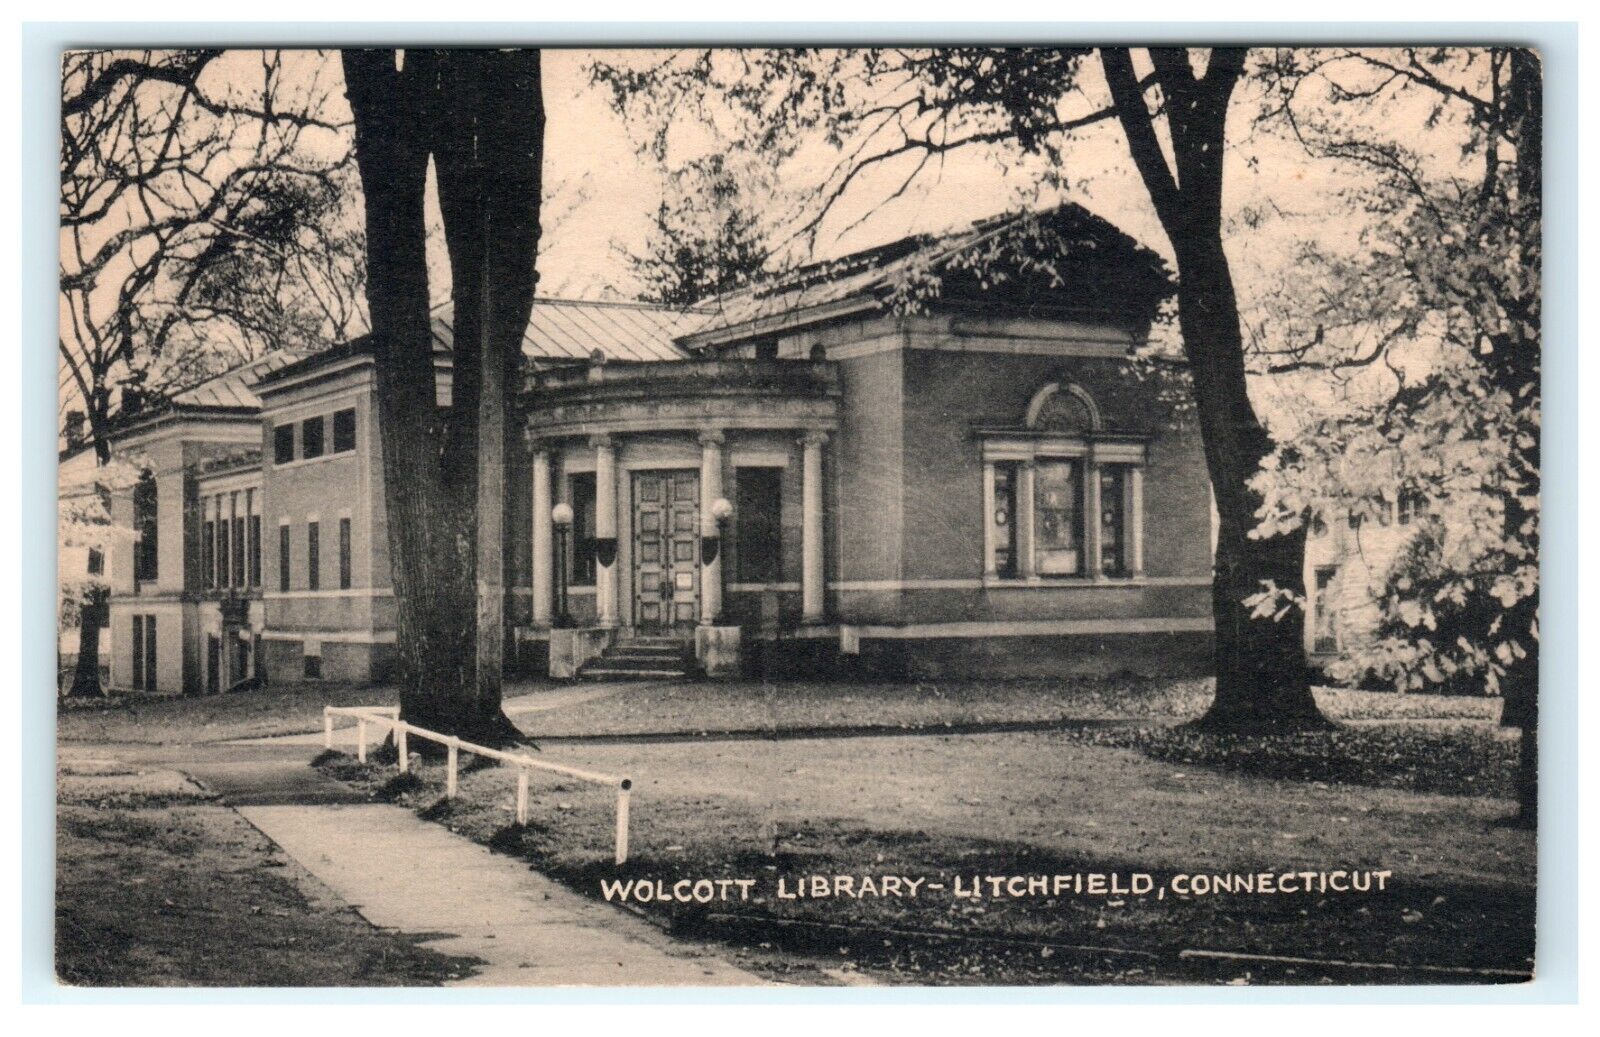 Wolcott Library Litchfield Connecticut Early View Postcard